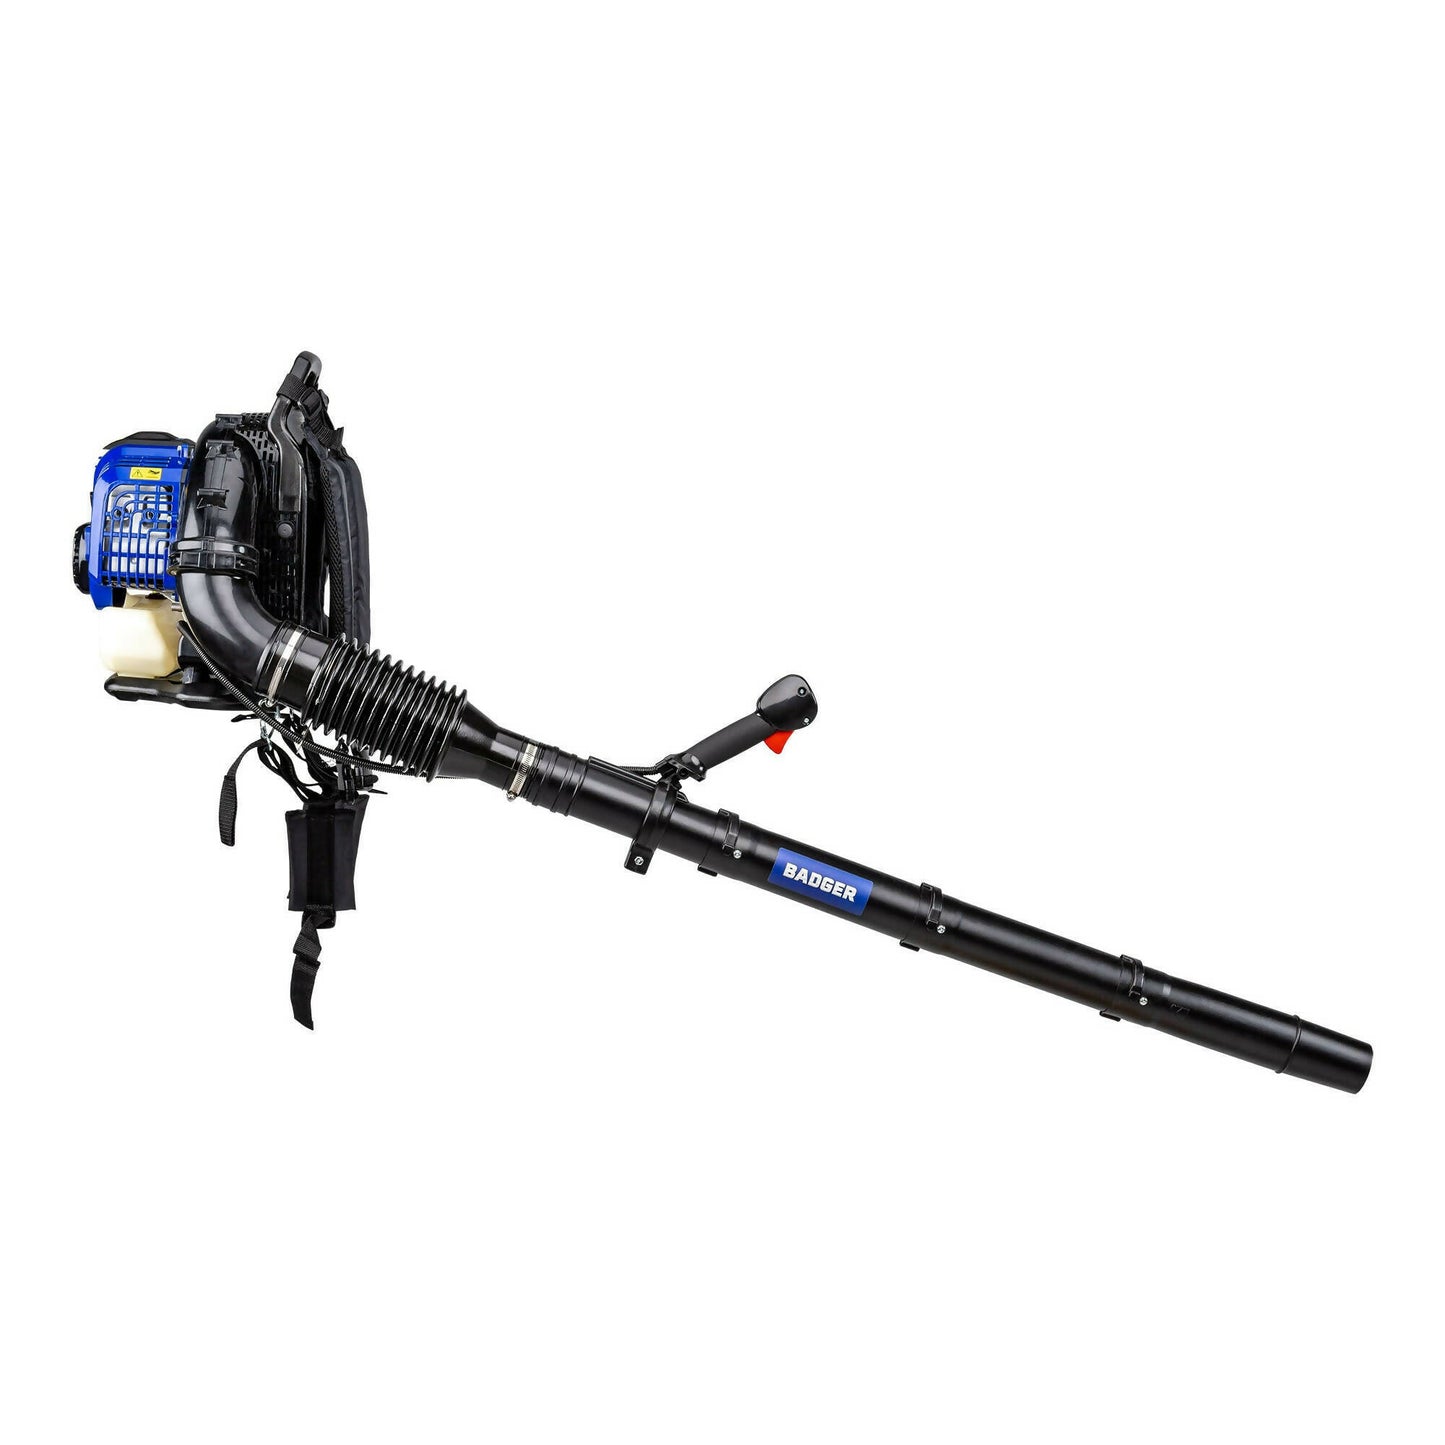 Wild Badger Power Gas 53cc Backpack Blower